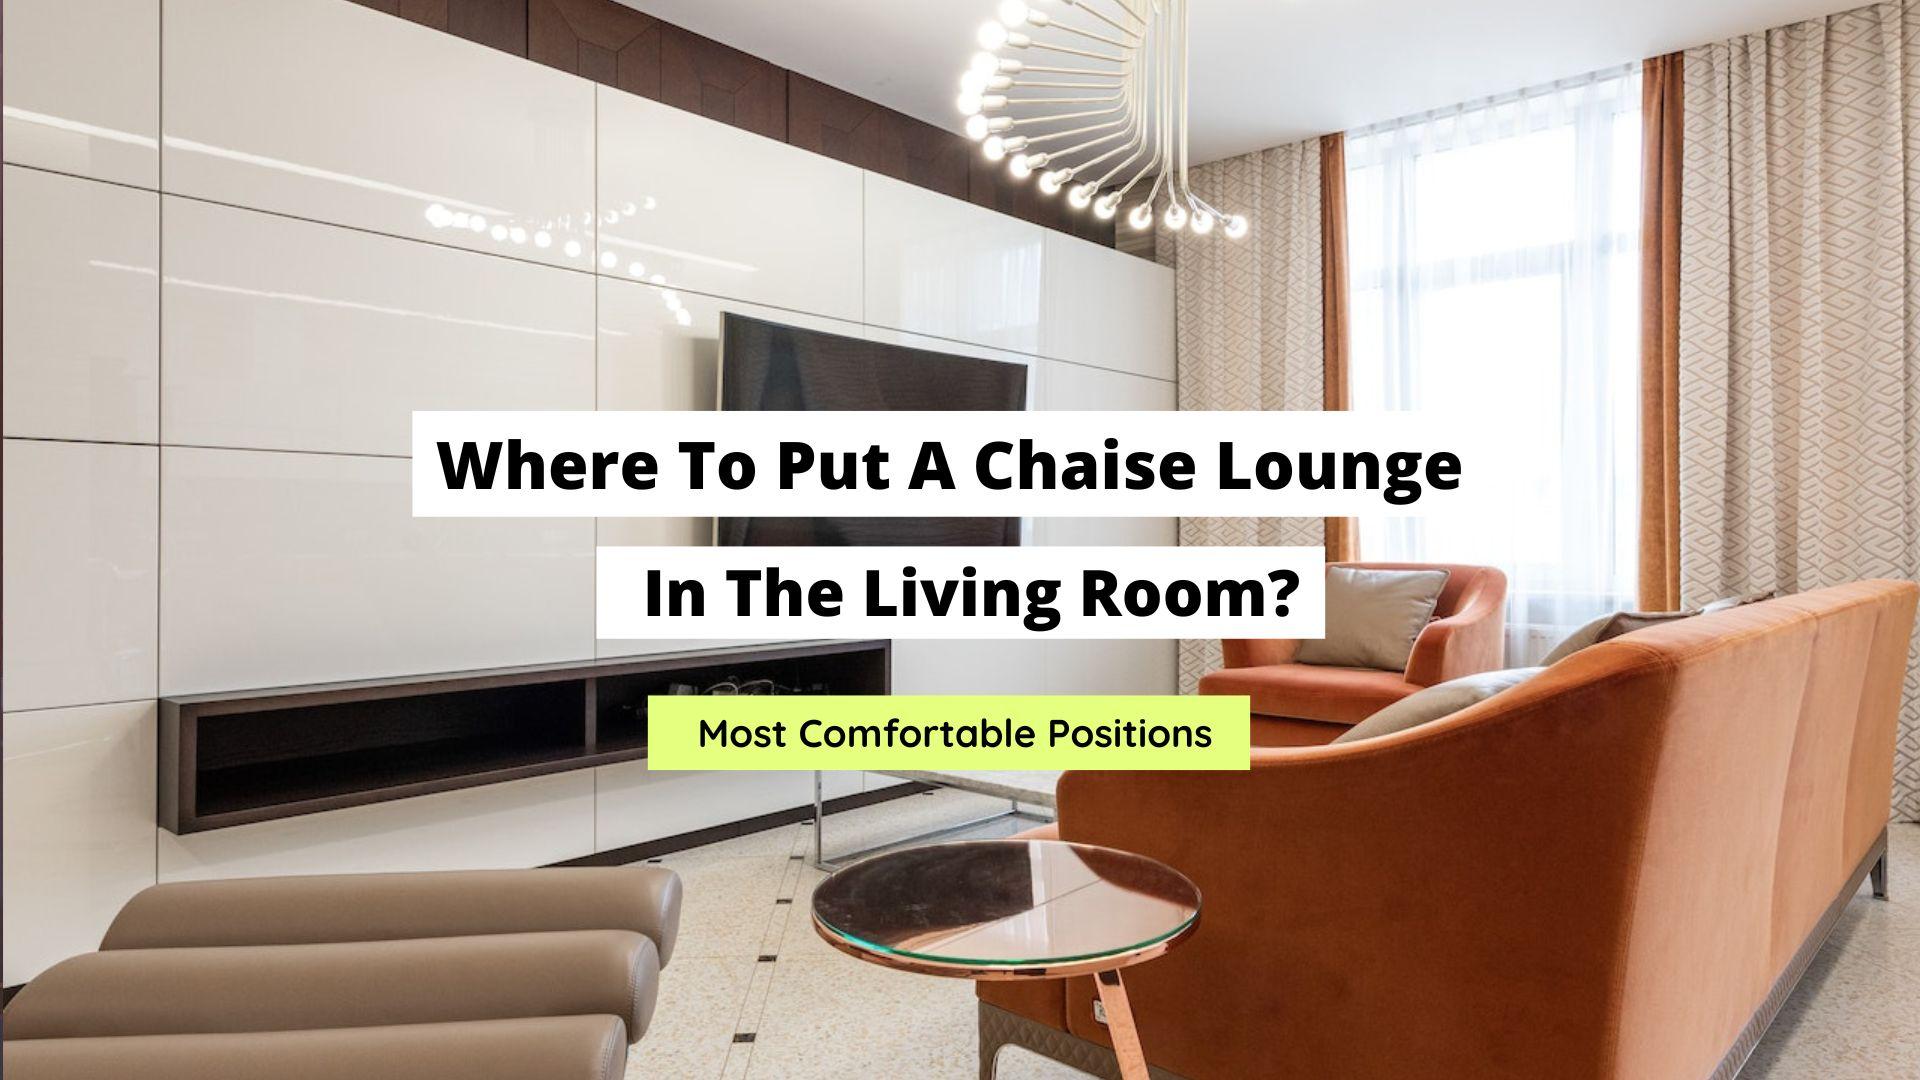 Where To Put A Chaise Lounge In The Living Room